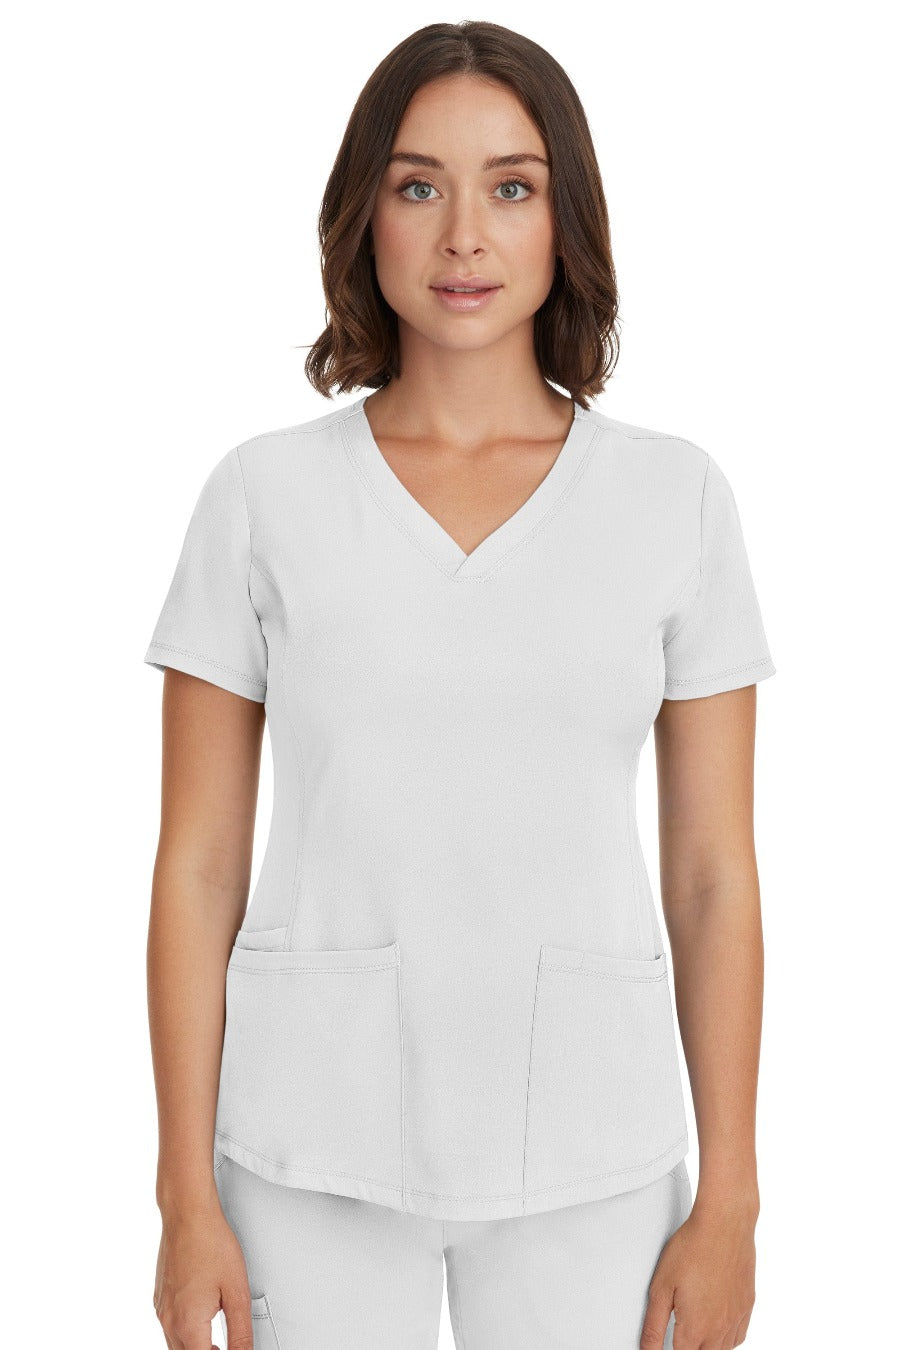 HH Works by Healing Hands Monica Scrub Top, Stretchy Scrub Tops